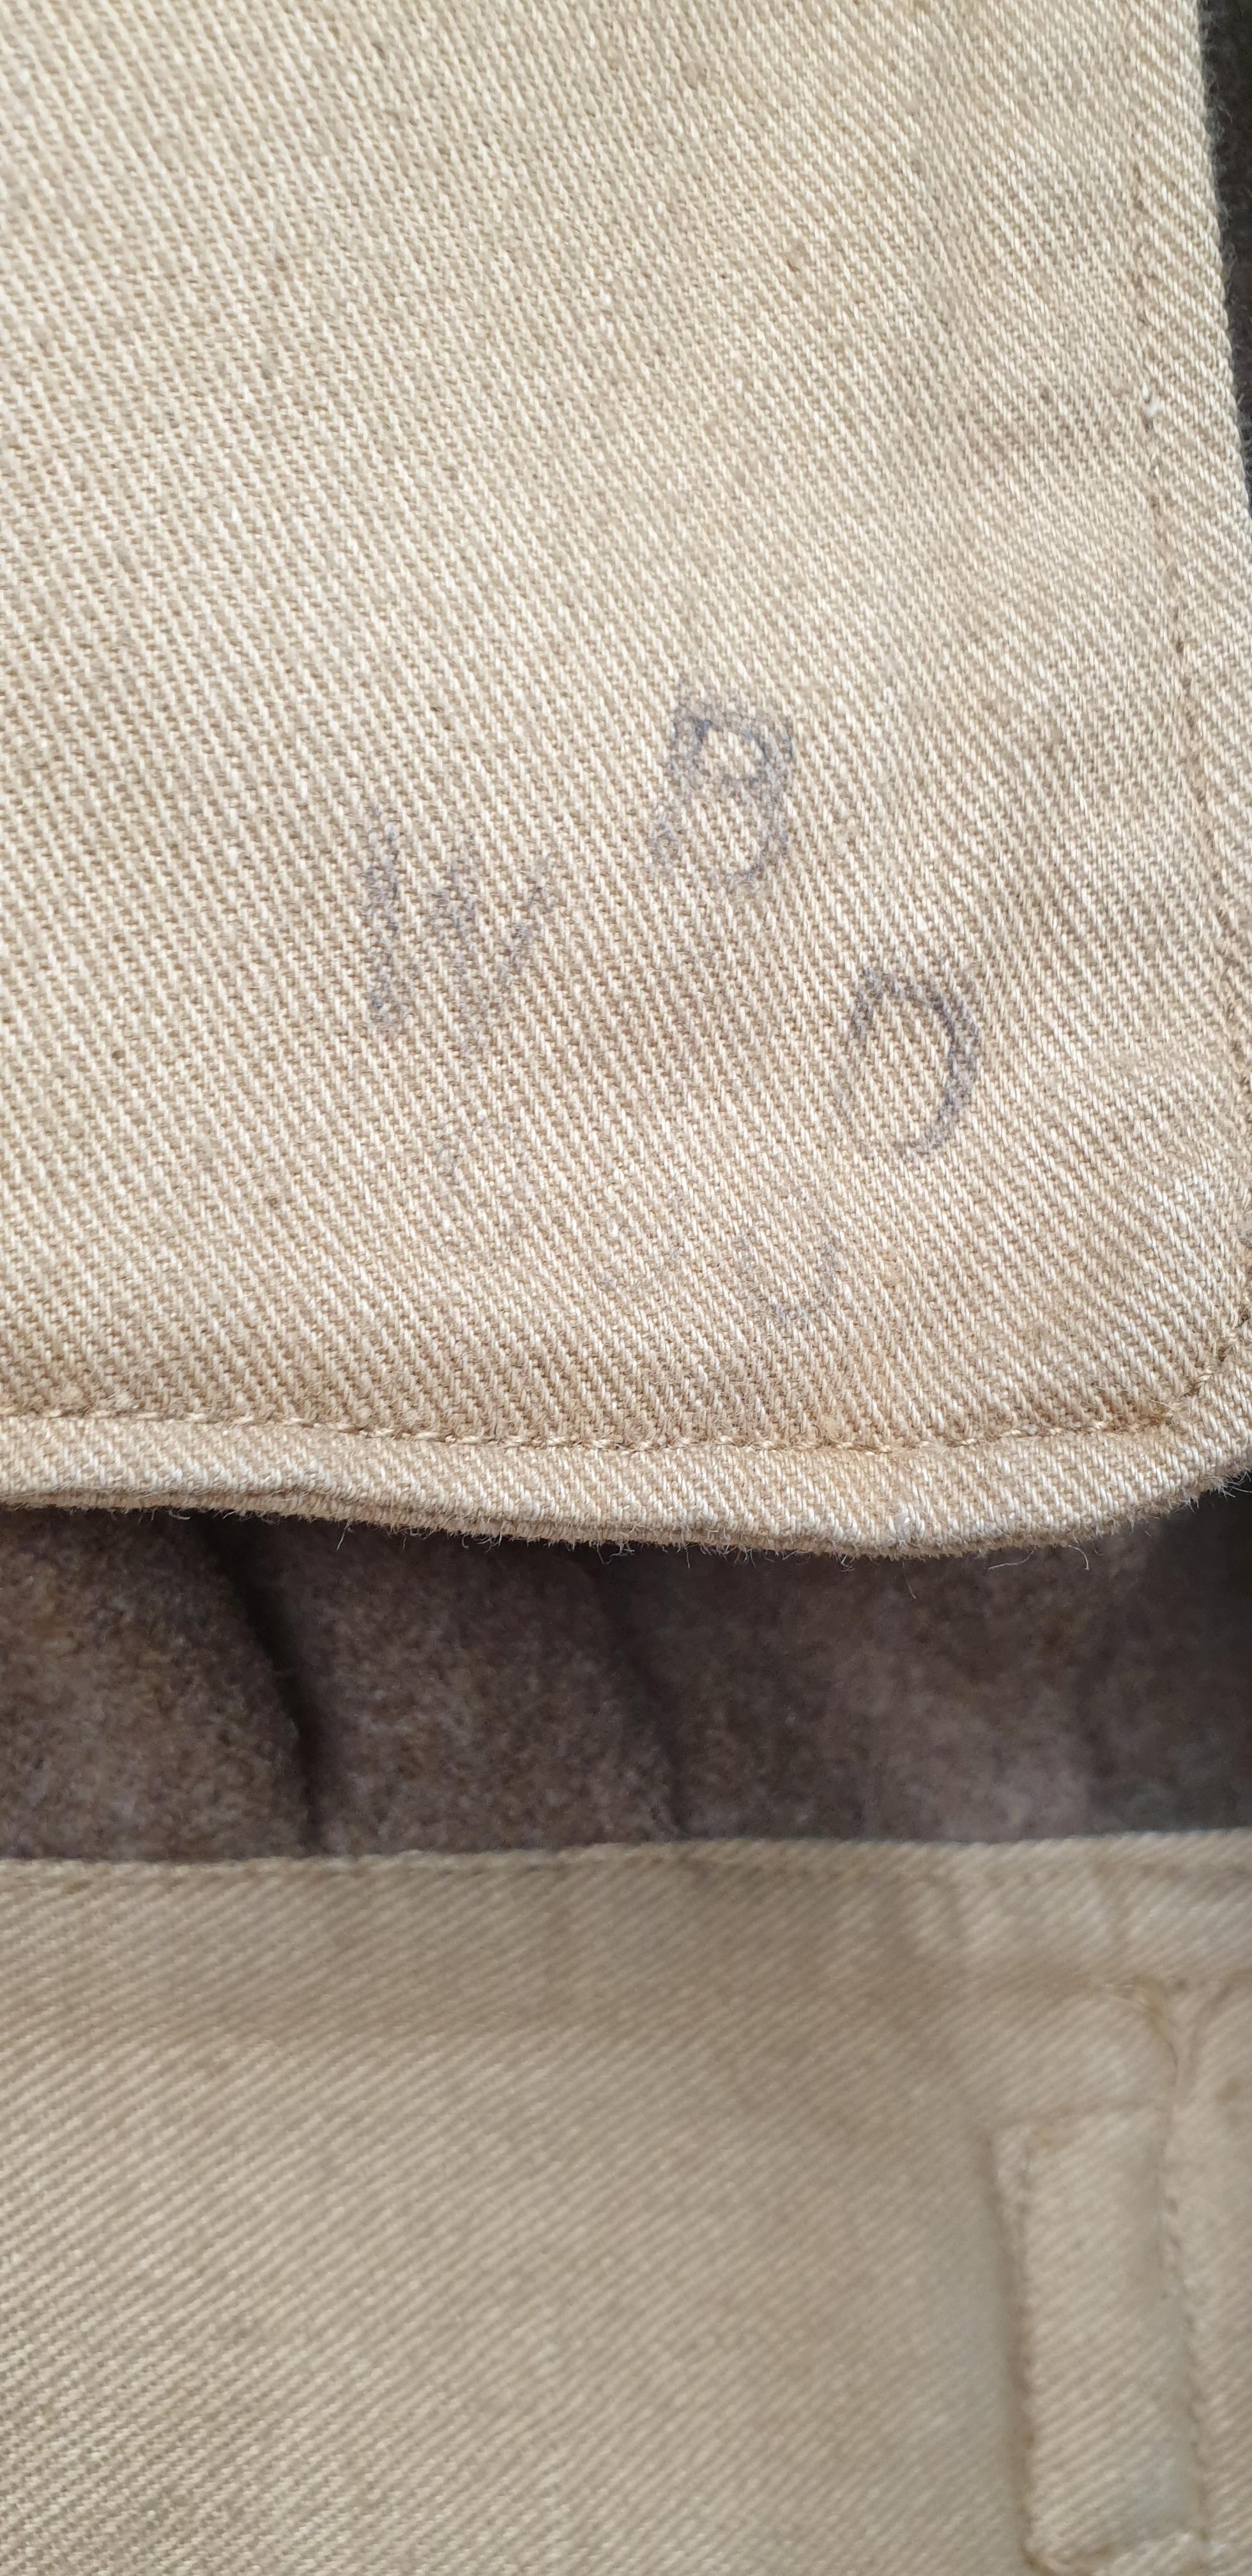 An Army uniform with Essex regiment shoulder patches - Image 4 of 4